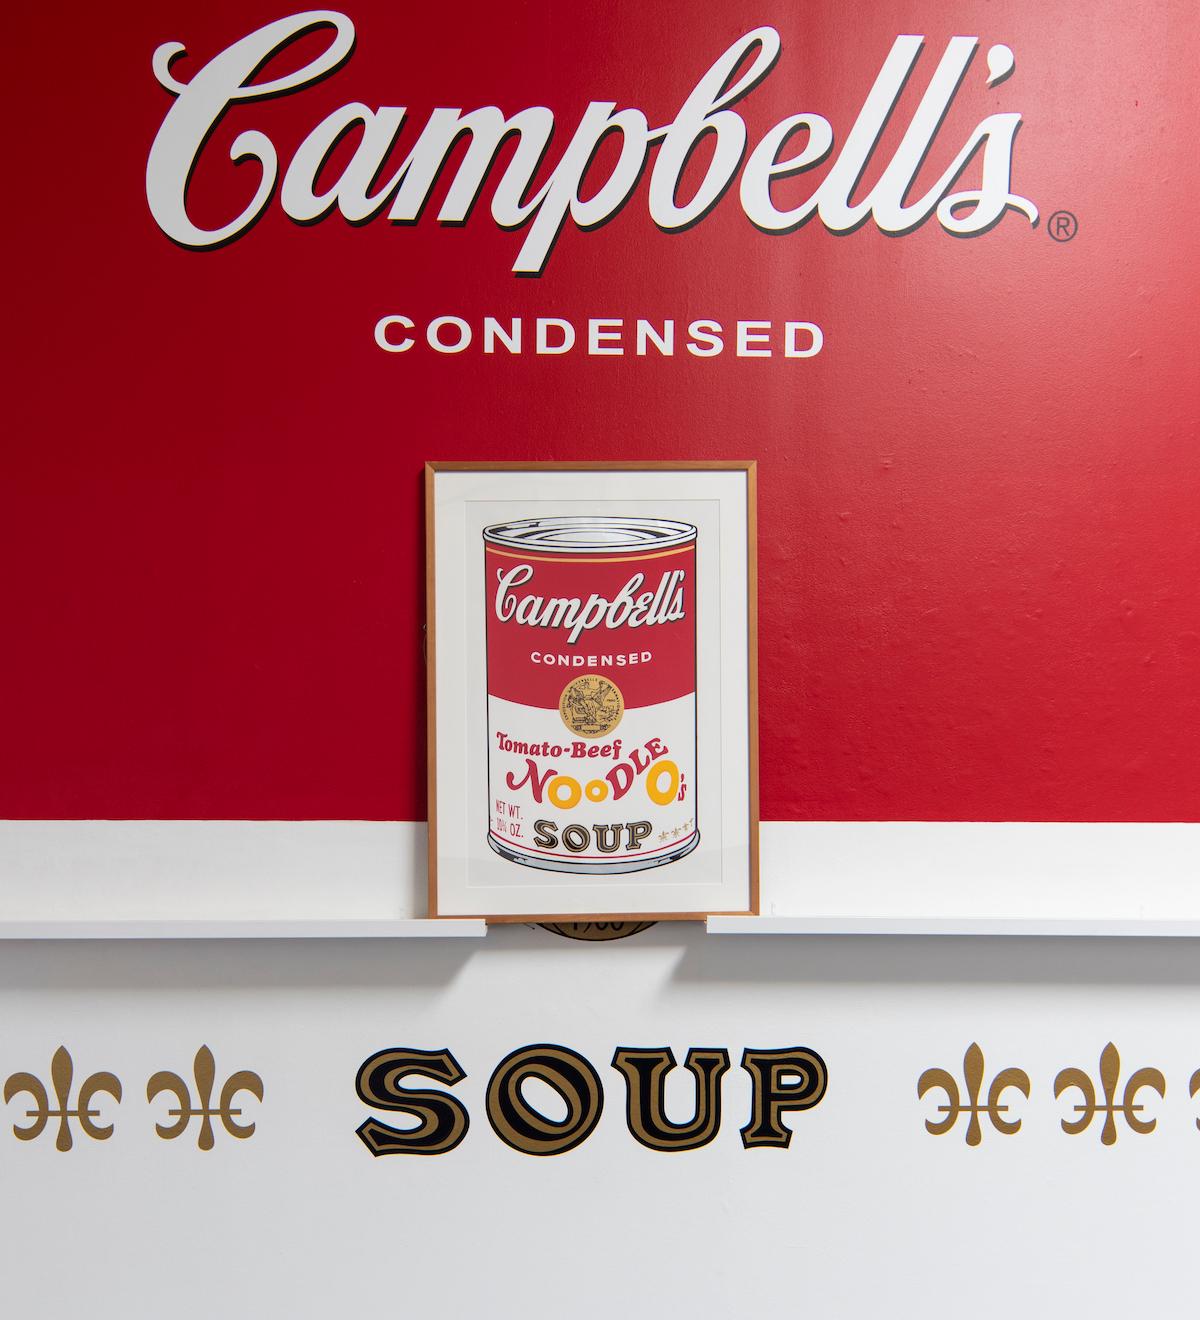 andy warhol tomato beef noodle o's soup